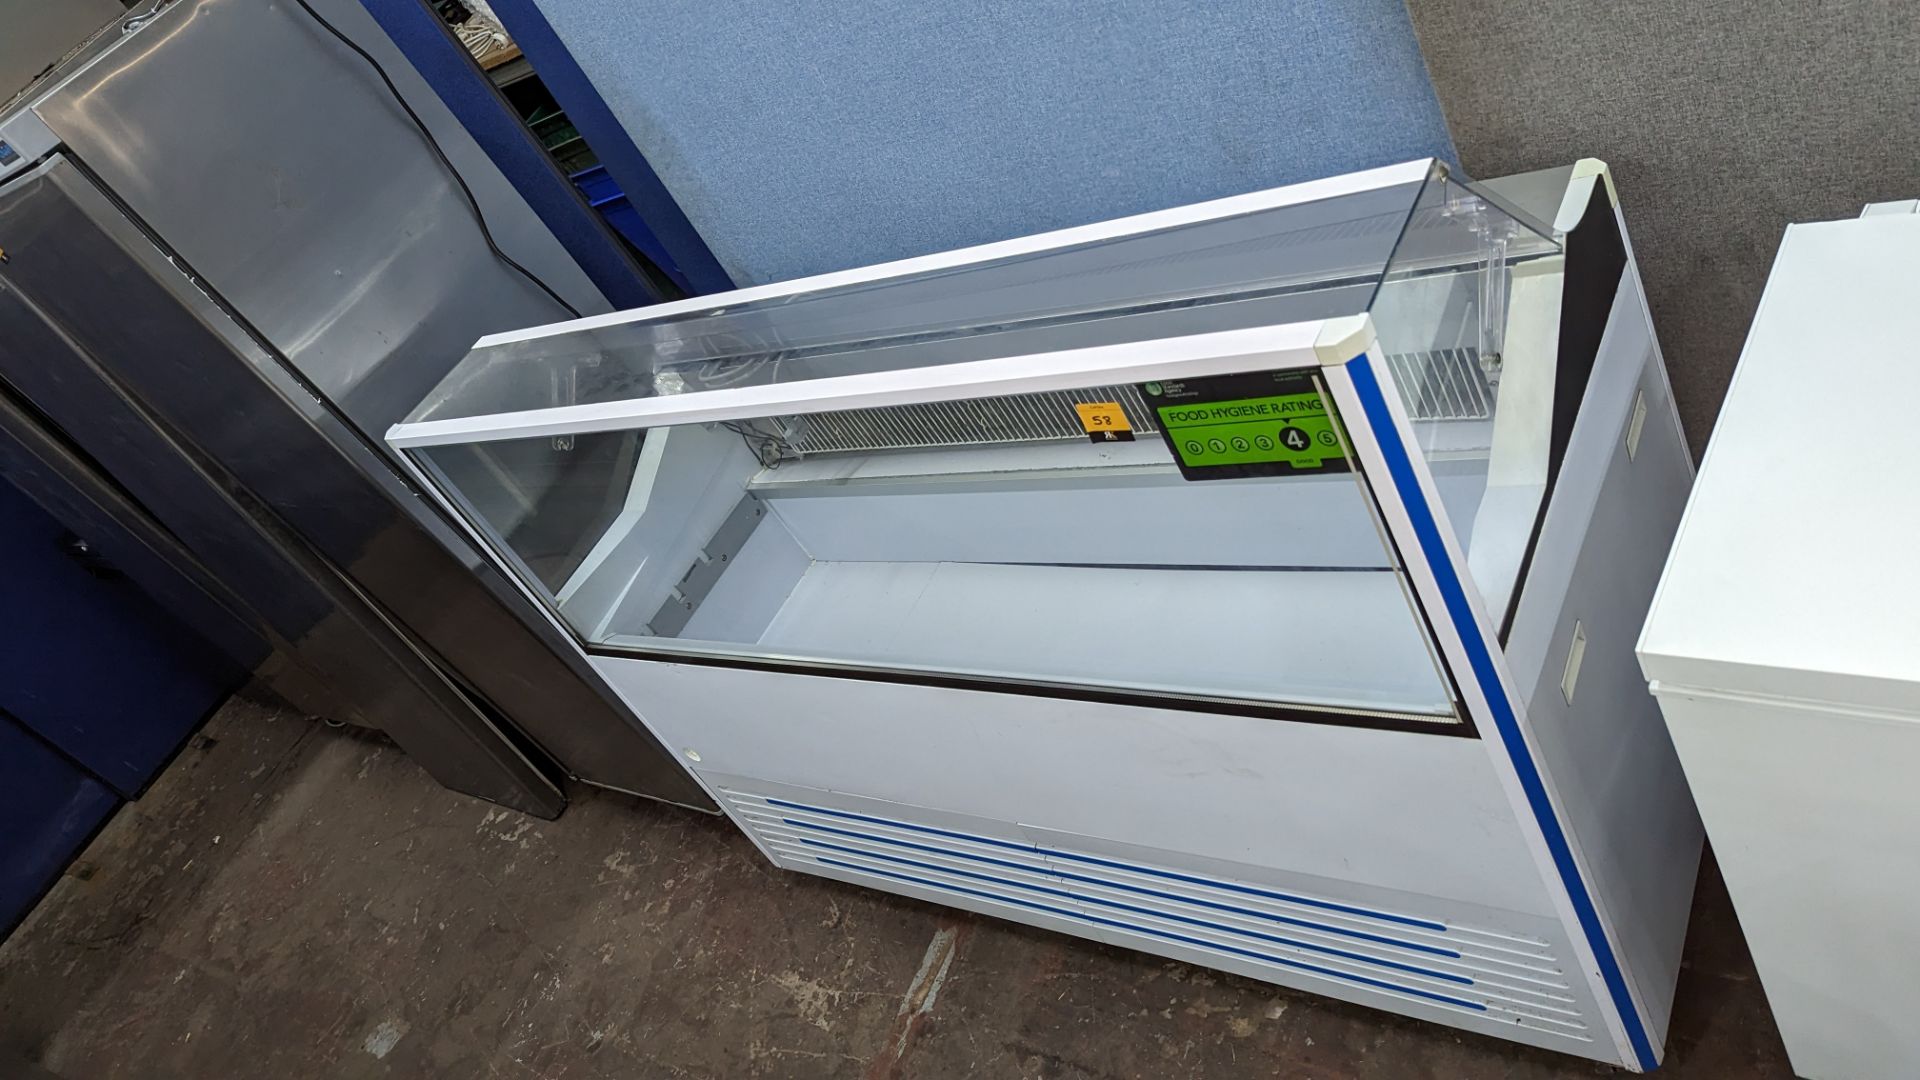 Refrigerated mobile ice cream counter, approximately 166cm wide - Image 2 of 9